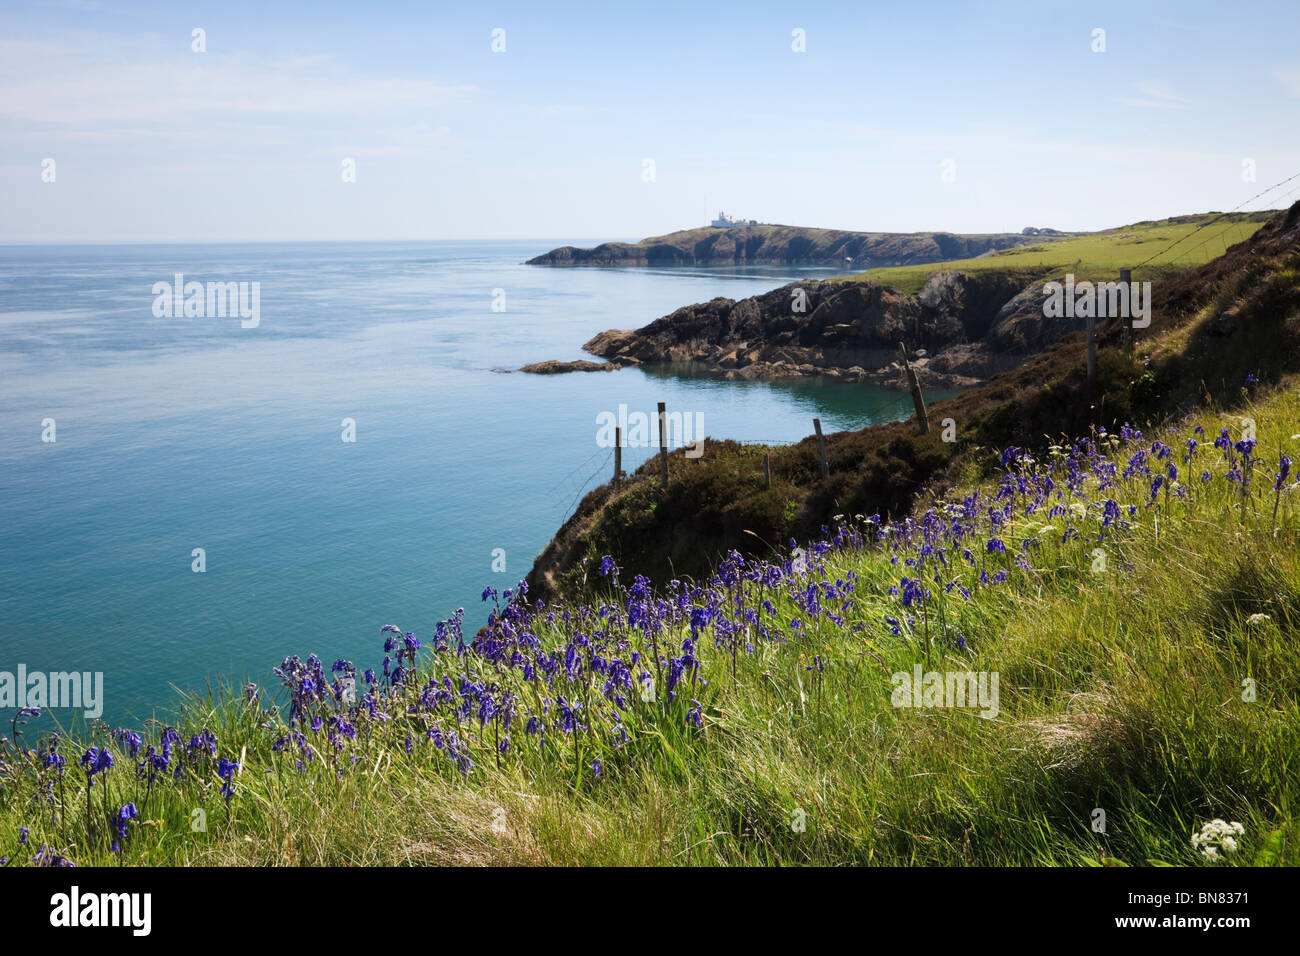 View across sea to Point Lynas (Trwyn Eilian) lighthouse with Bluebells in spring. Llaneilian, Isle of Anglesey, North Wales, UK Stock Photo